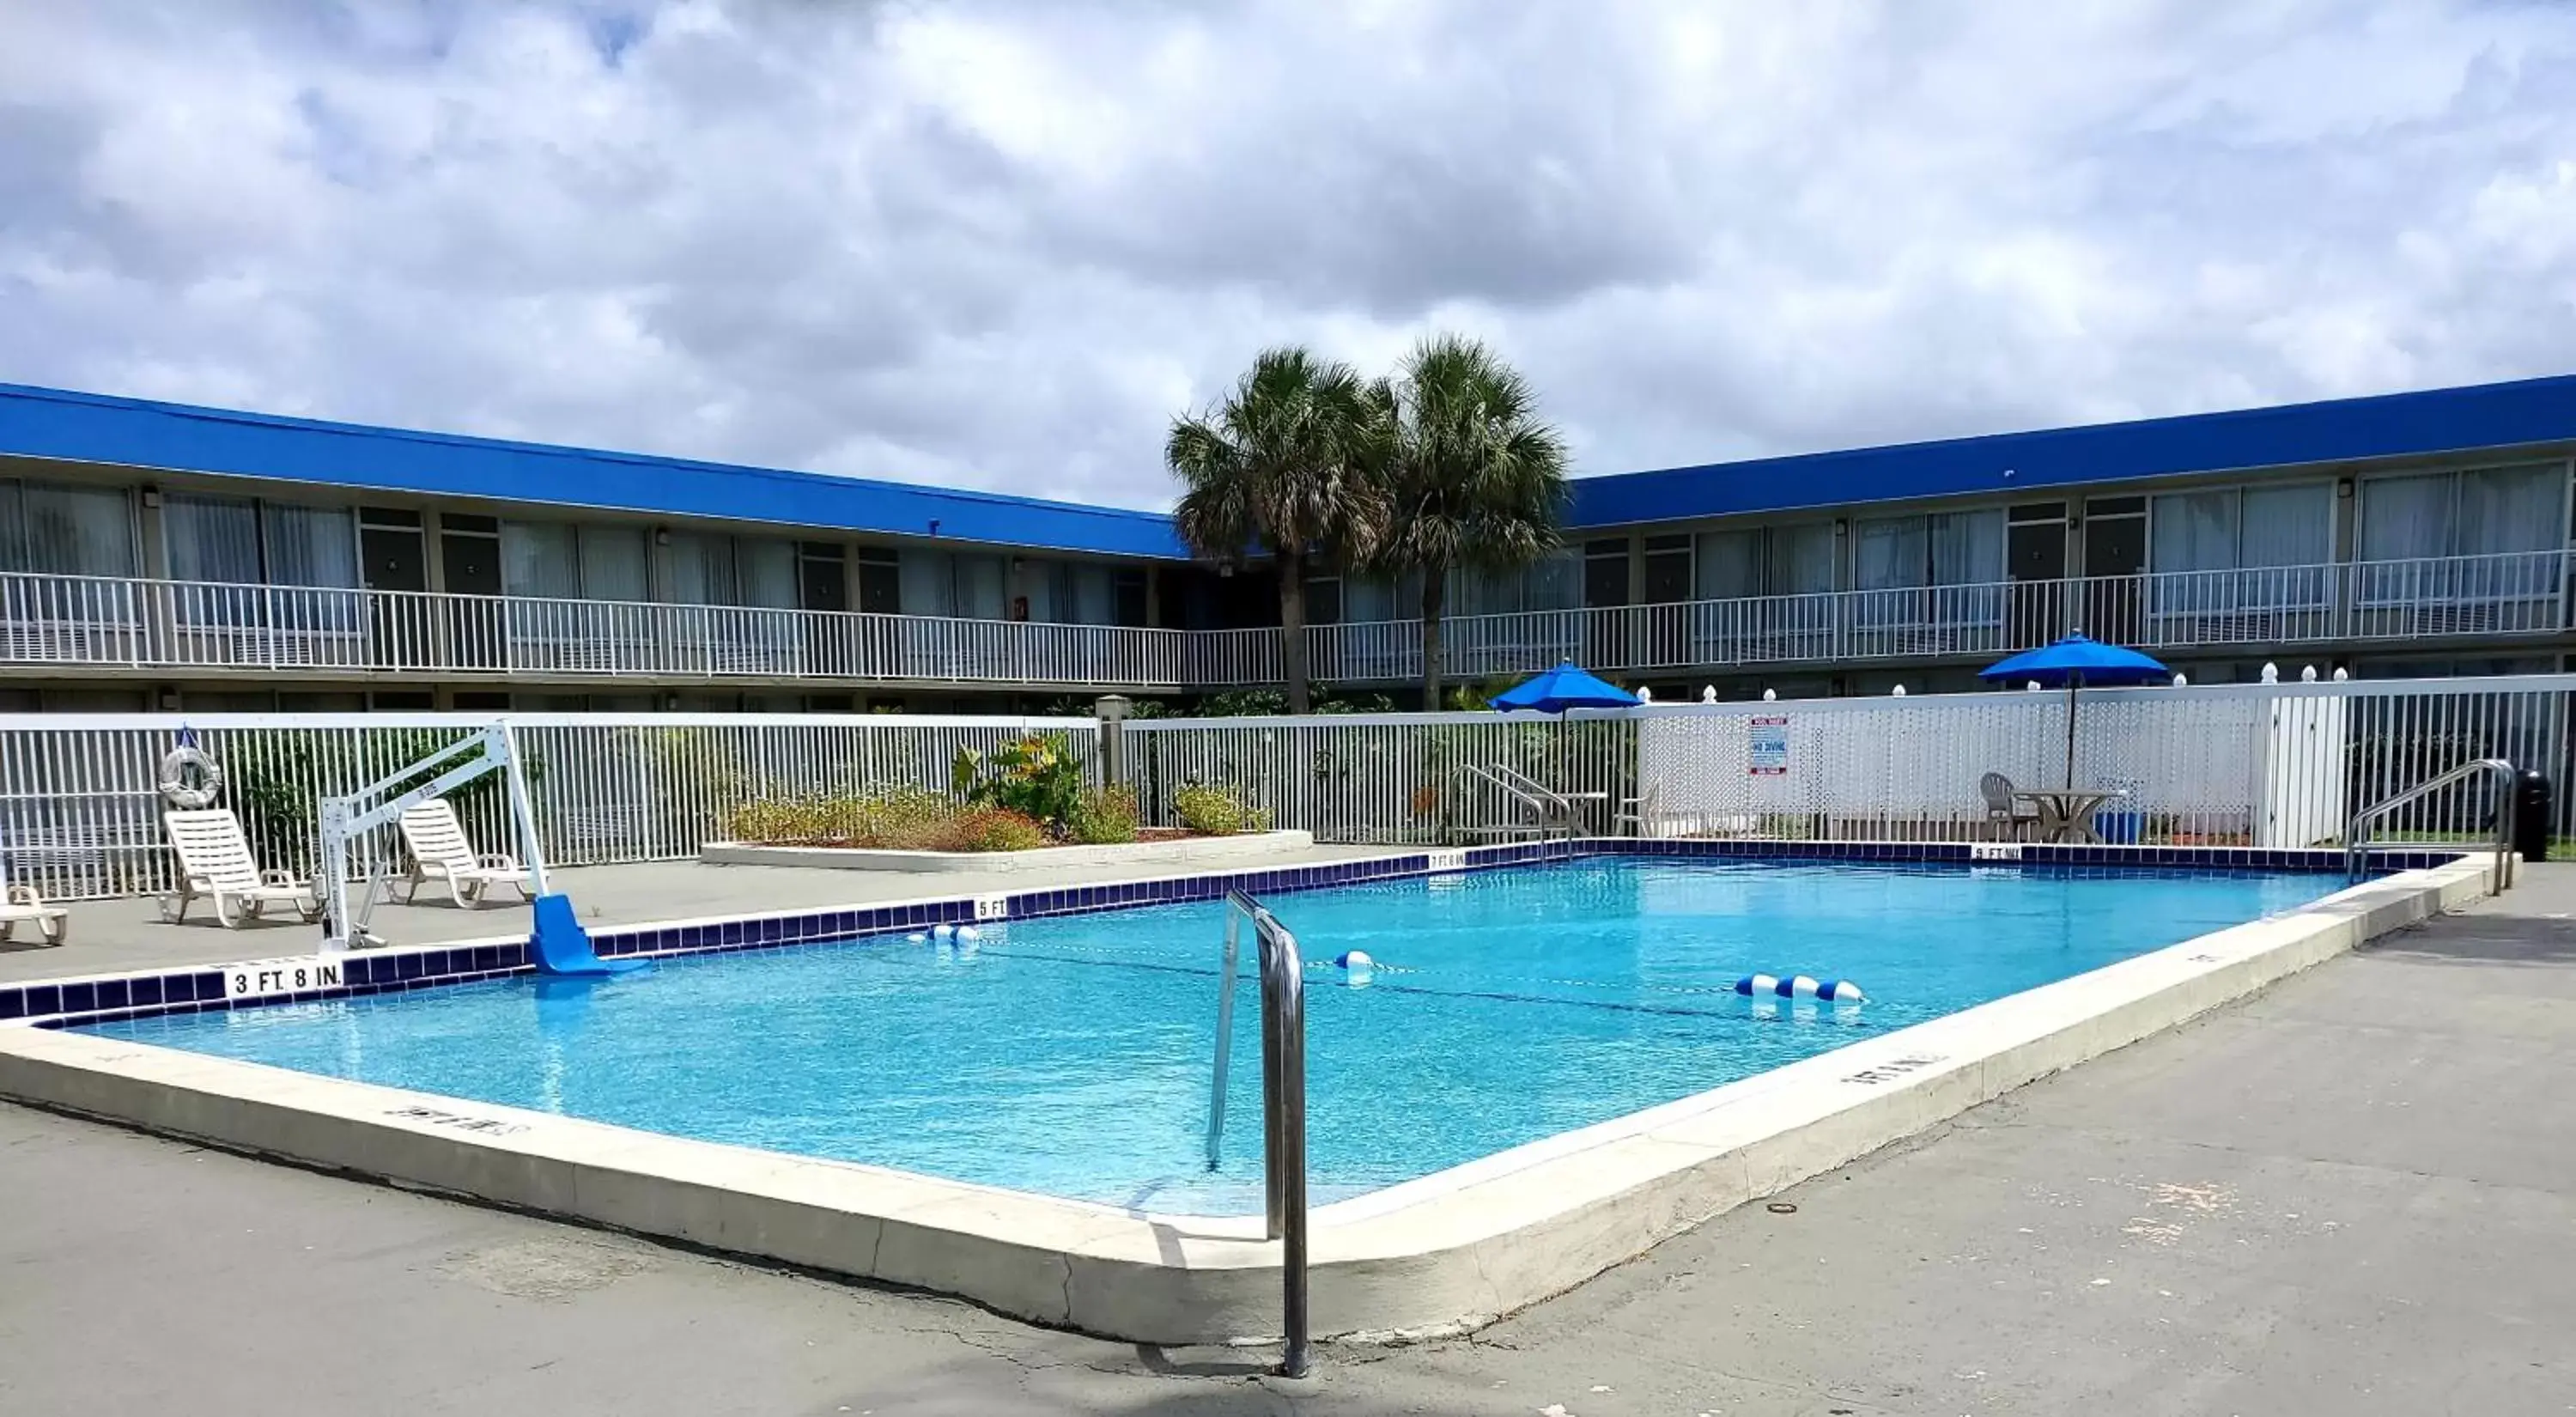 Property Building in Days Inn by Wyndham Titusville Kennedy Space Center